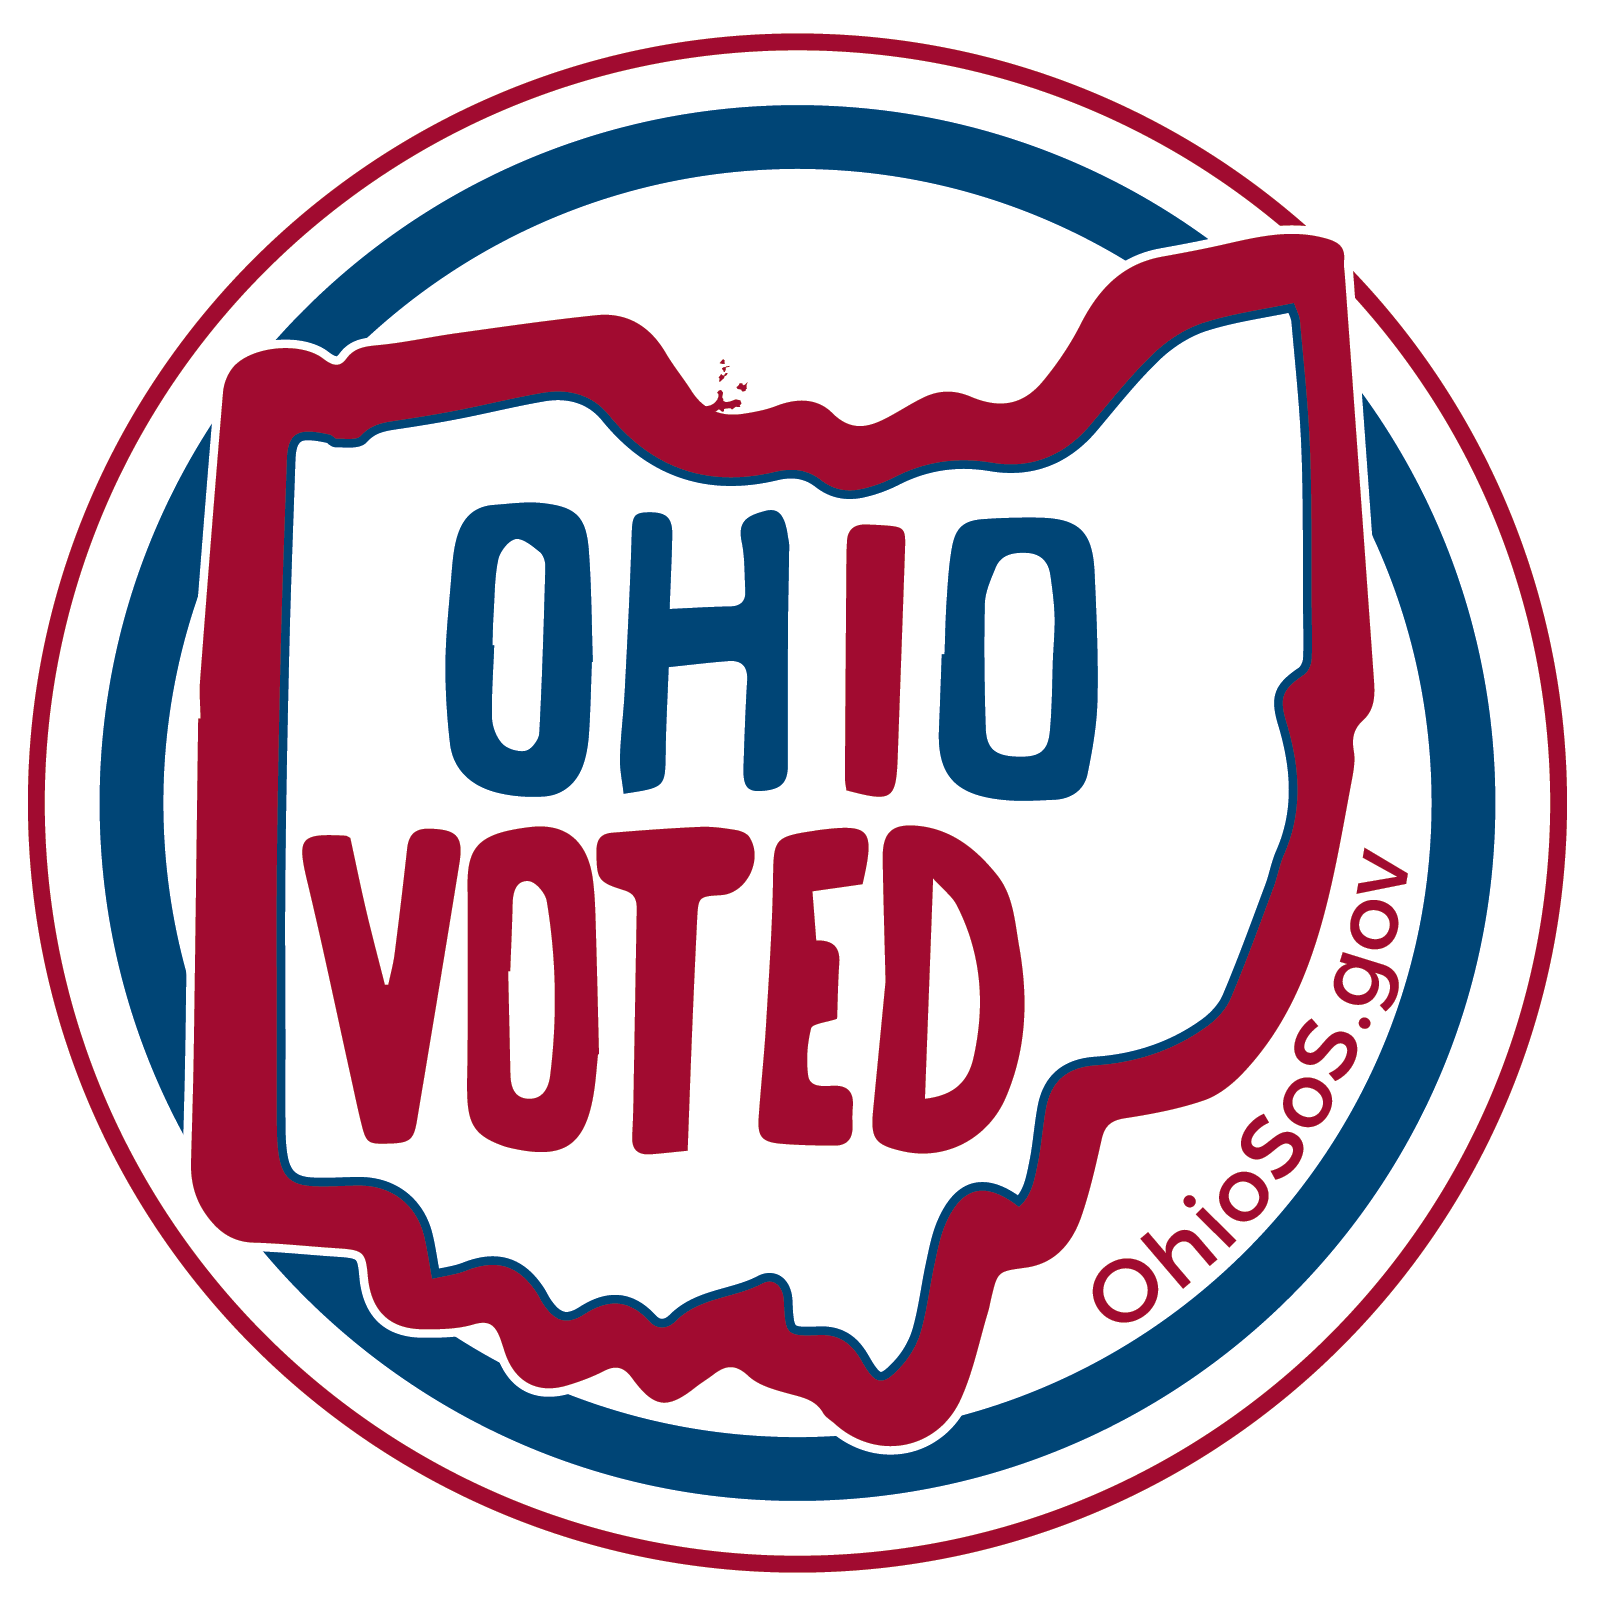 Ohio Voted Sticker Graphic PNG